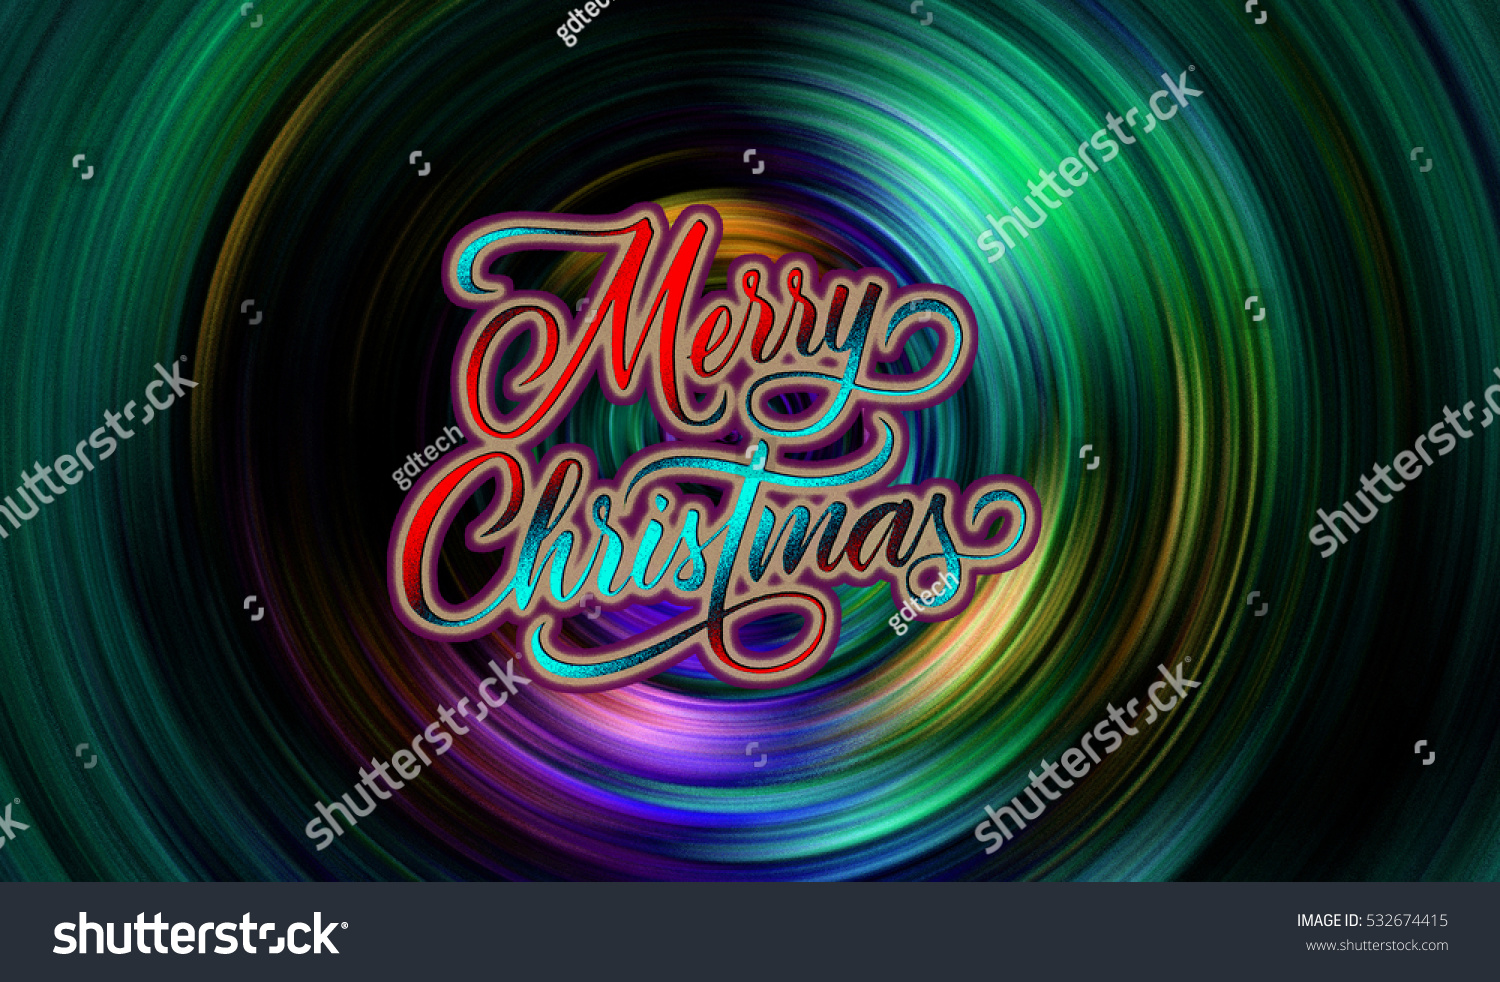 Colorful Image Background Merry Christmas Day Stock Illustration 532674415 - Shutterstock